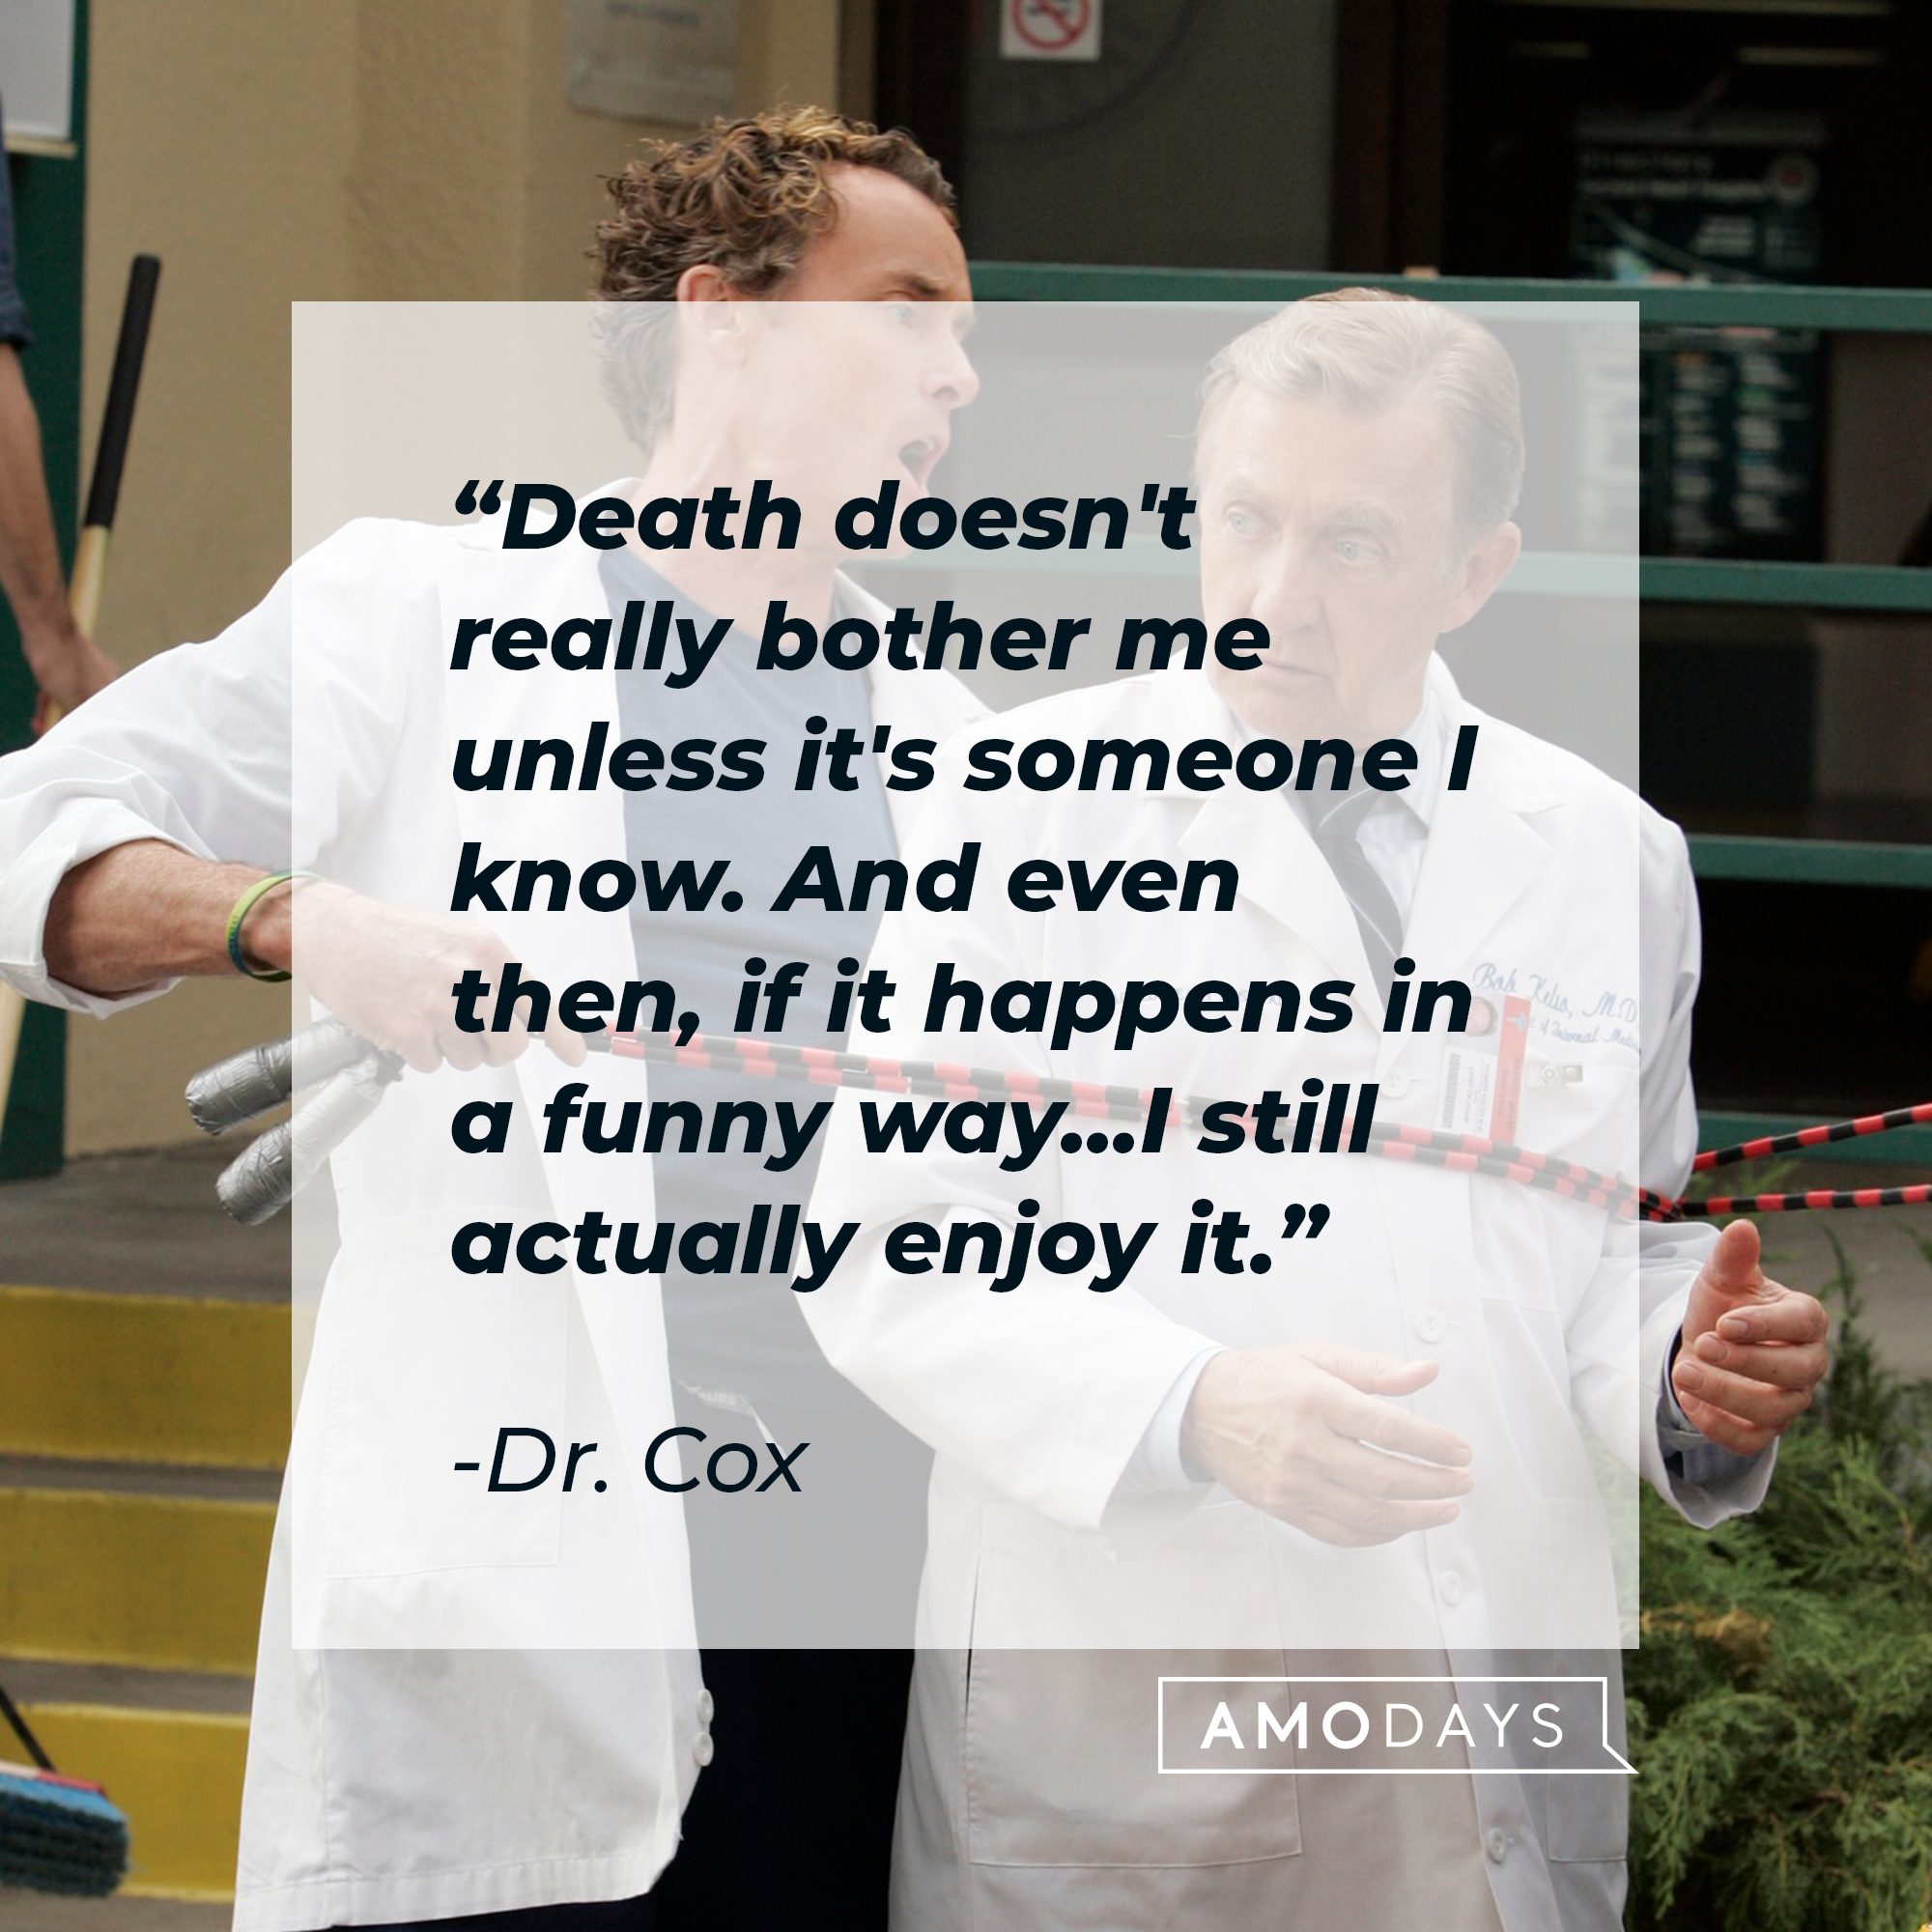 Dr. Cox and Bob Kelso, with Dr. Cox’s quote: “Death doesn't really bother me unless it's someone I know. And even then, if it happens in a funny way... I still actually enjoy it.” | Source: Facebook.com/scrubs